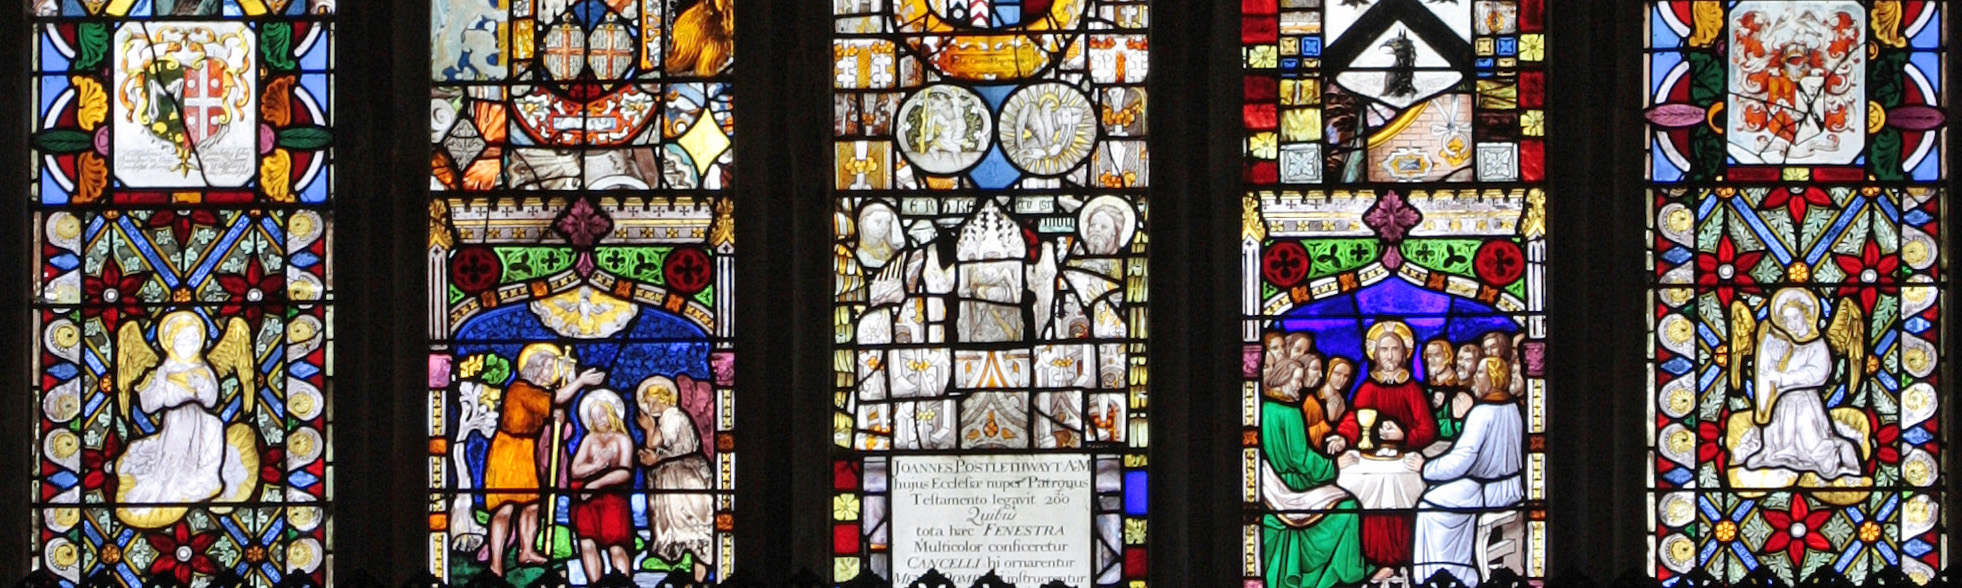 North Nave window containing fragments of 14th & 15th century glass